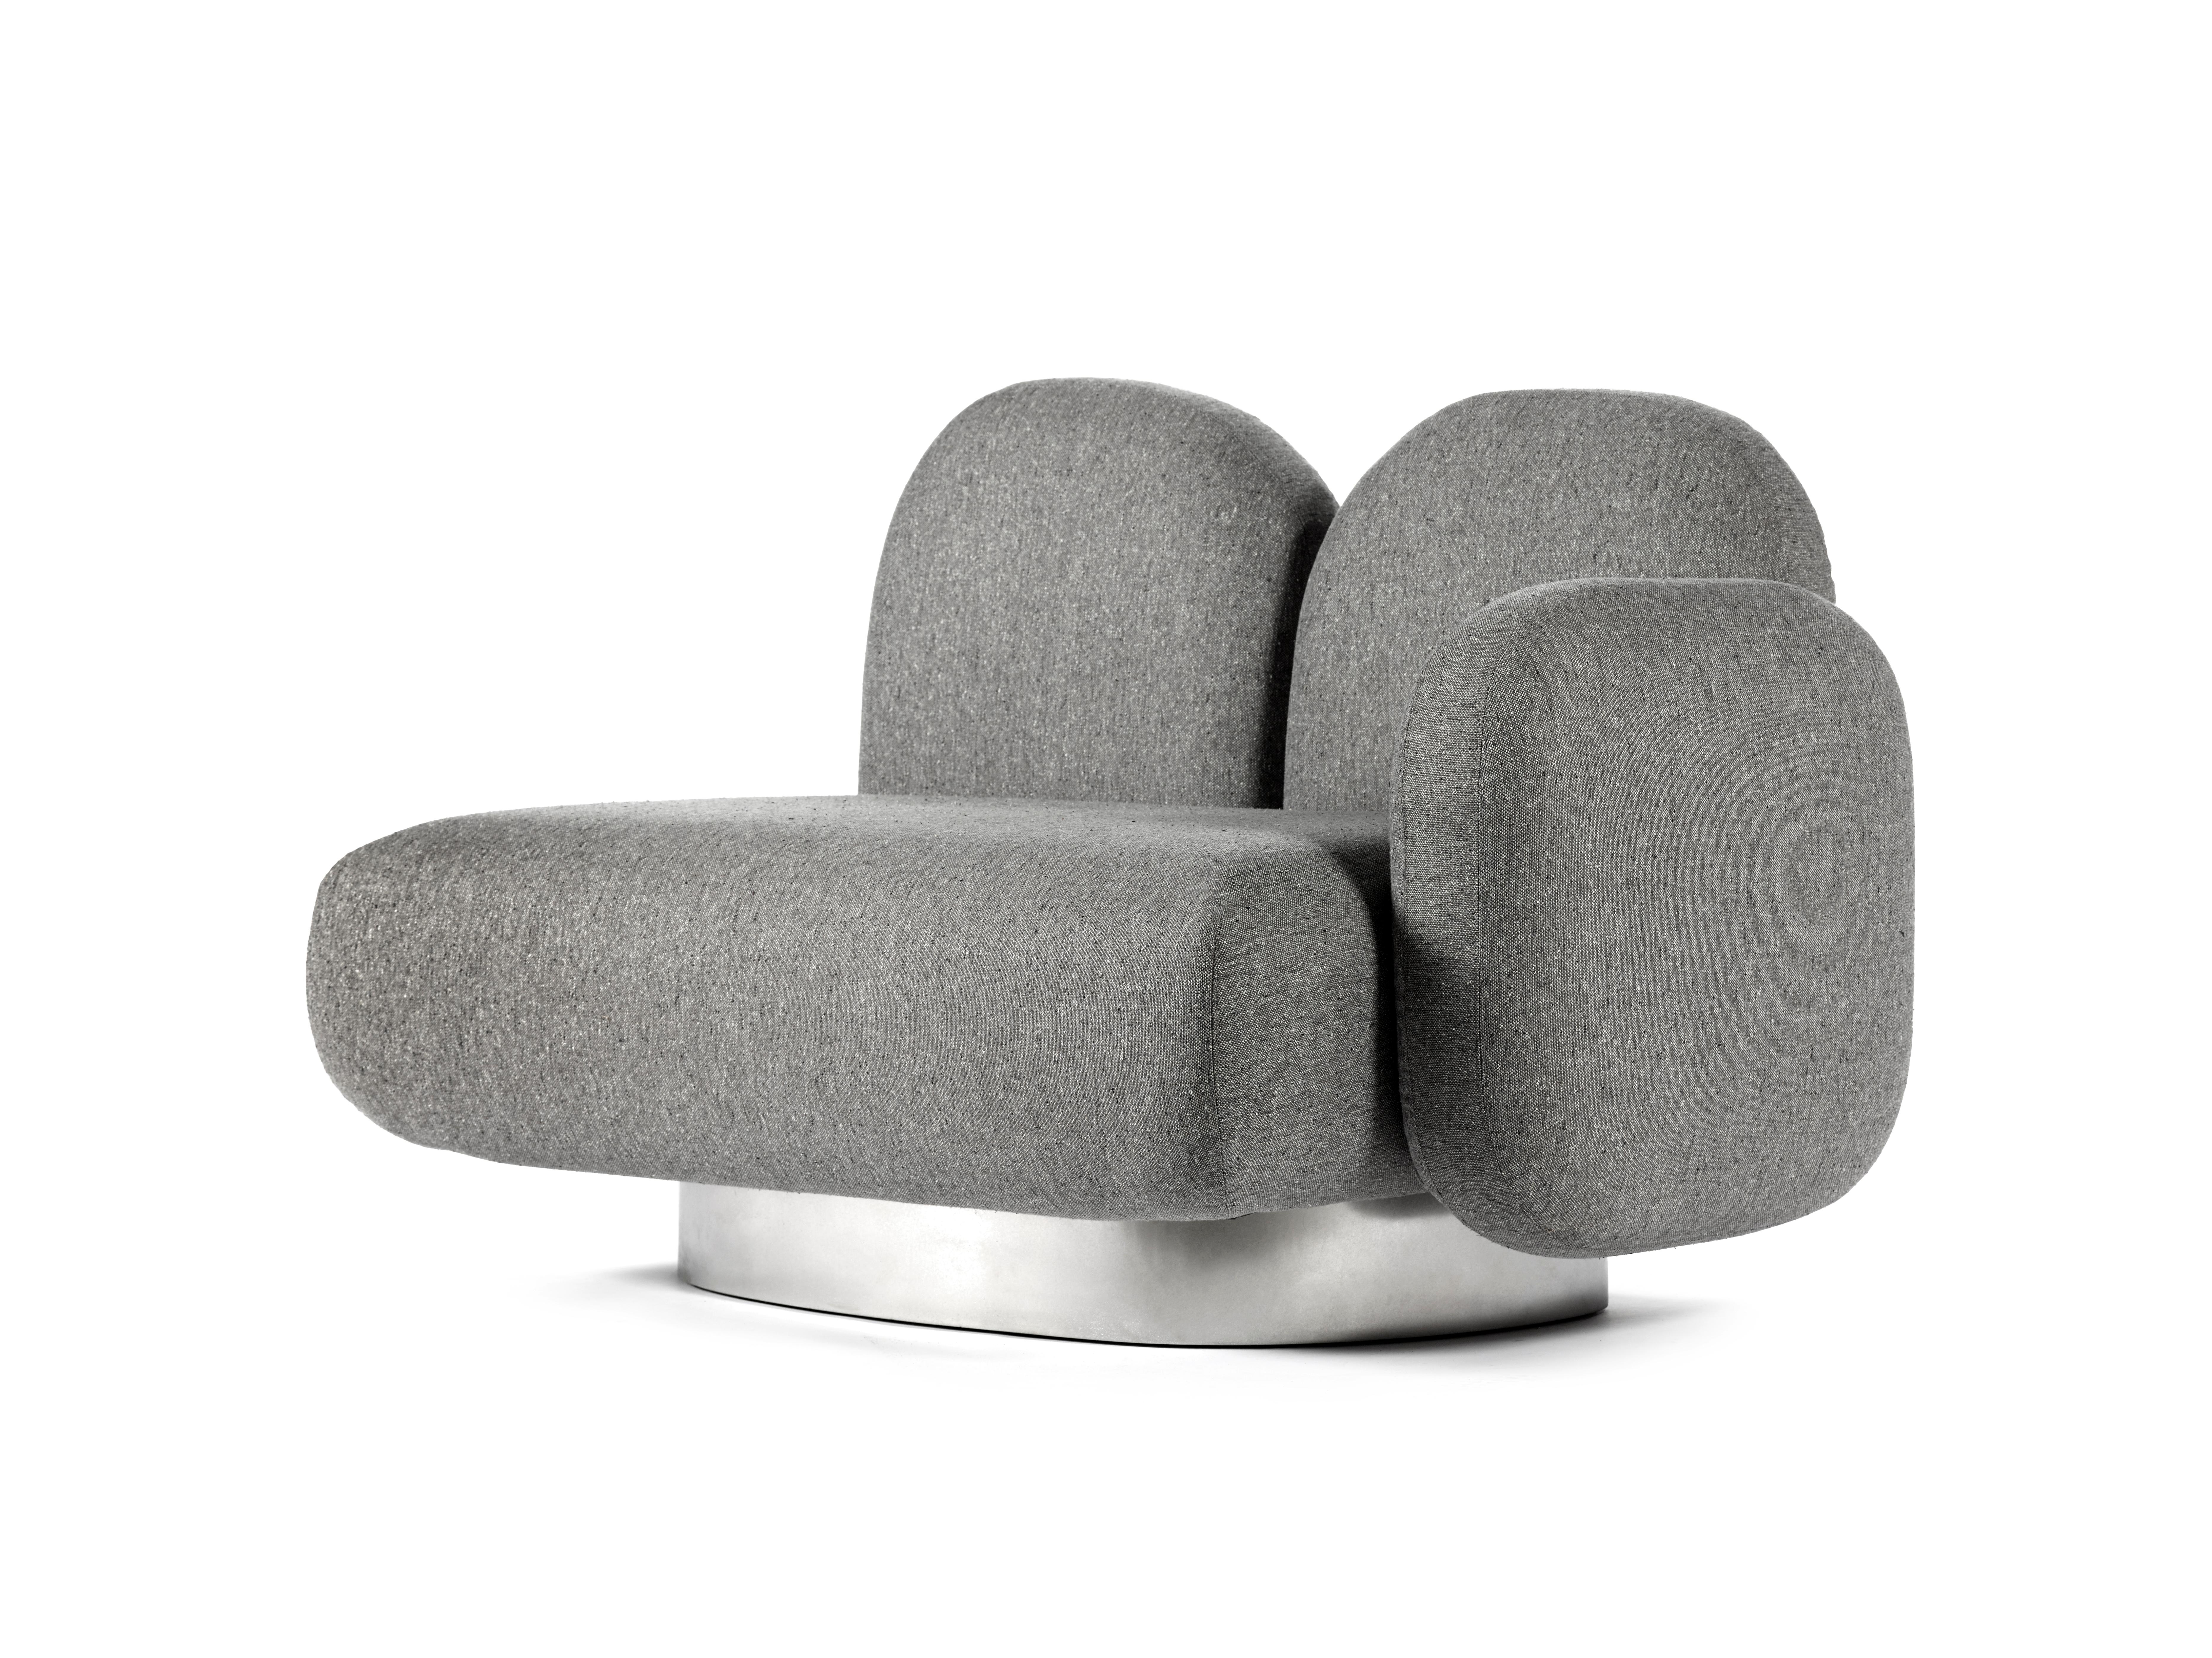 Modular Sofa Assemble 1-seat-sofa with 1 armrest right
Designed by Destroyers/Builders x Valerie Objects
Upholstery: Sevo Grey

Code: V9020325

Dimensions: L 87 W 123 H 85CM (SH 40 cm)
Materials: Wood, aluminium and upholstery

The ASSEMBLE sofa